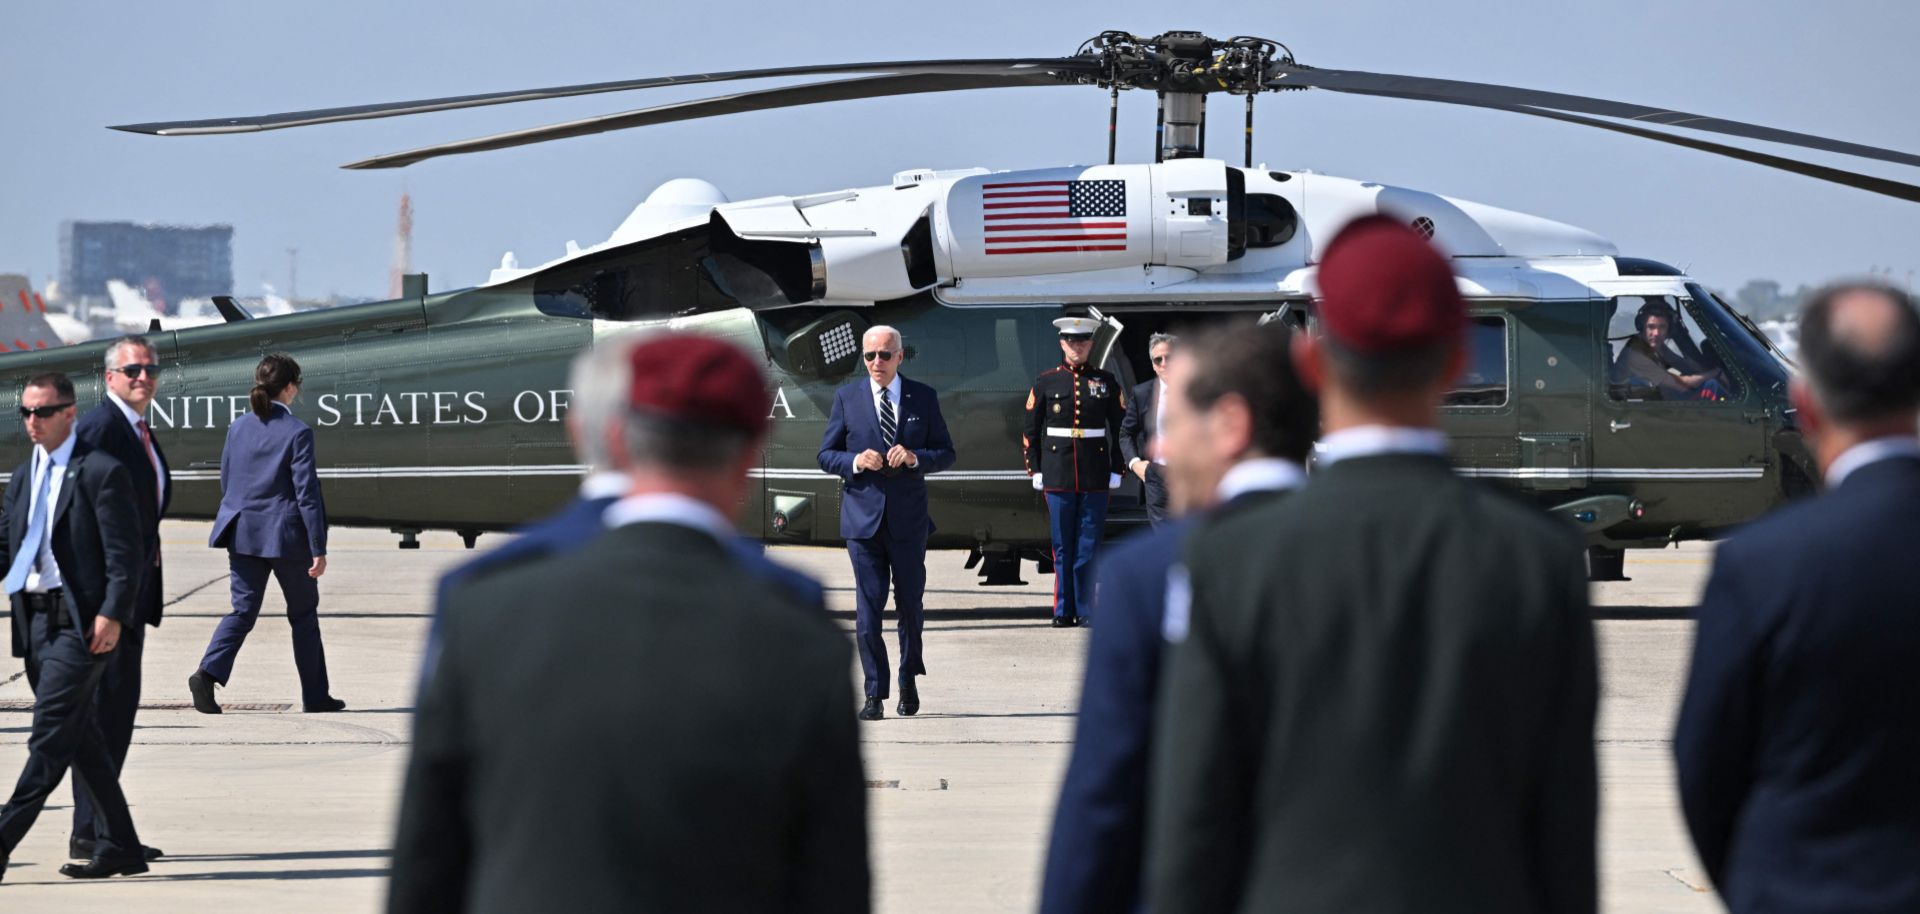 U.S. President Joe Biden makes his way to board Air Force One at Israel's Ben Gurion Airport on July 15, 2022, as he departs for Saudi Arabia after a two-day visit to Israel. 